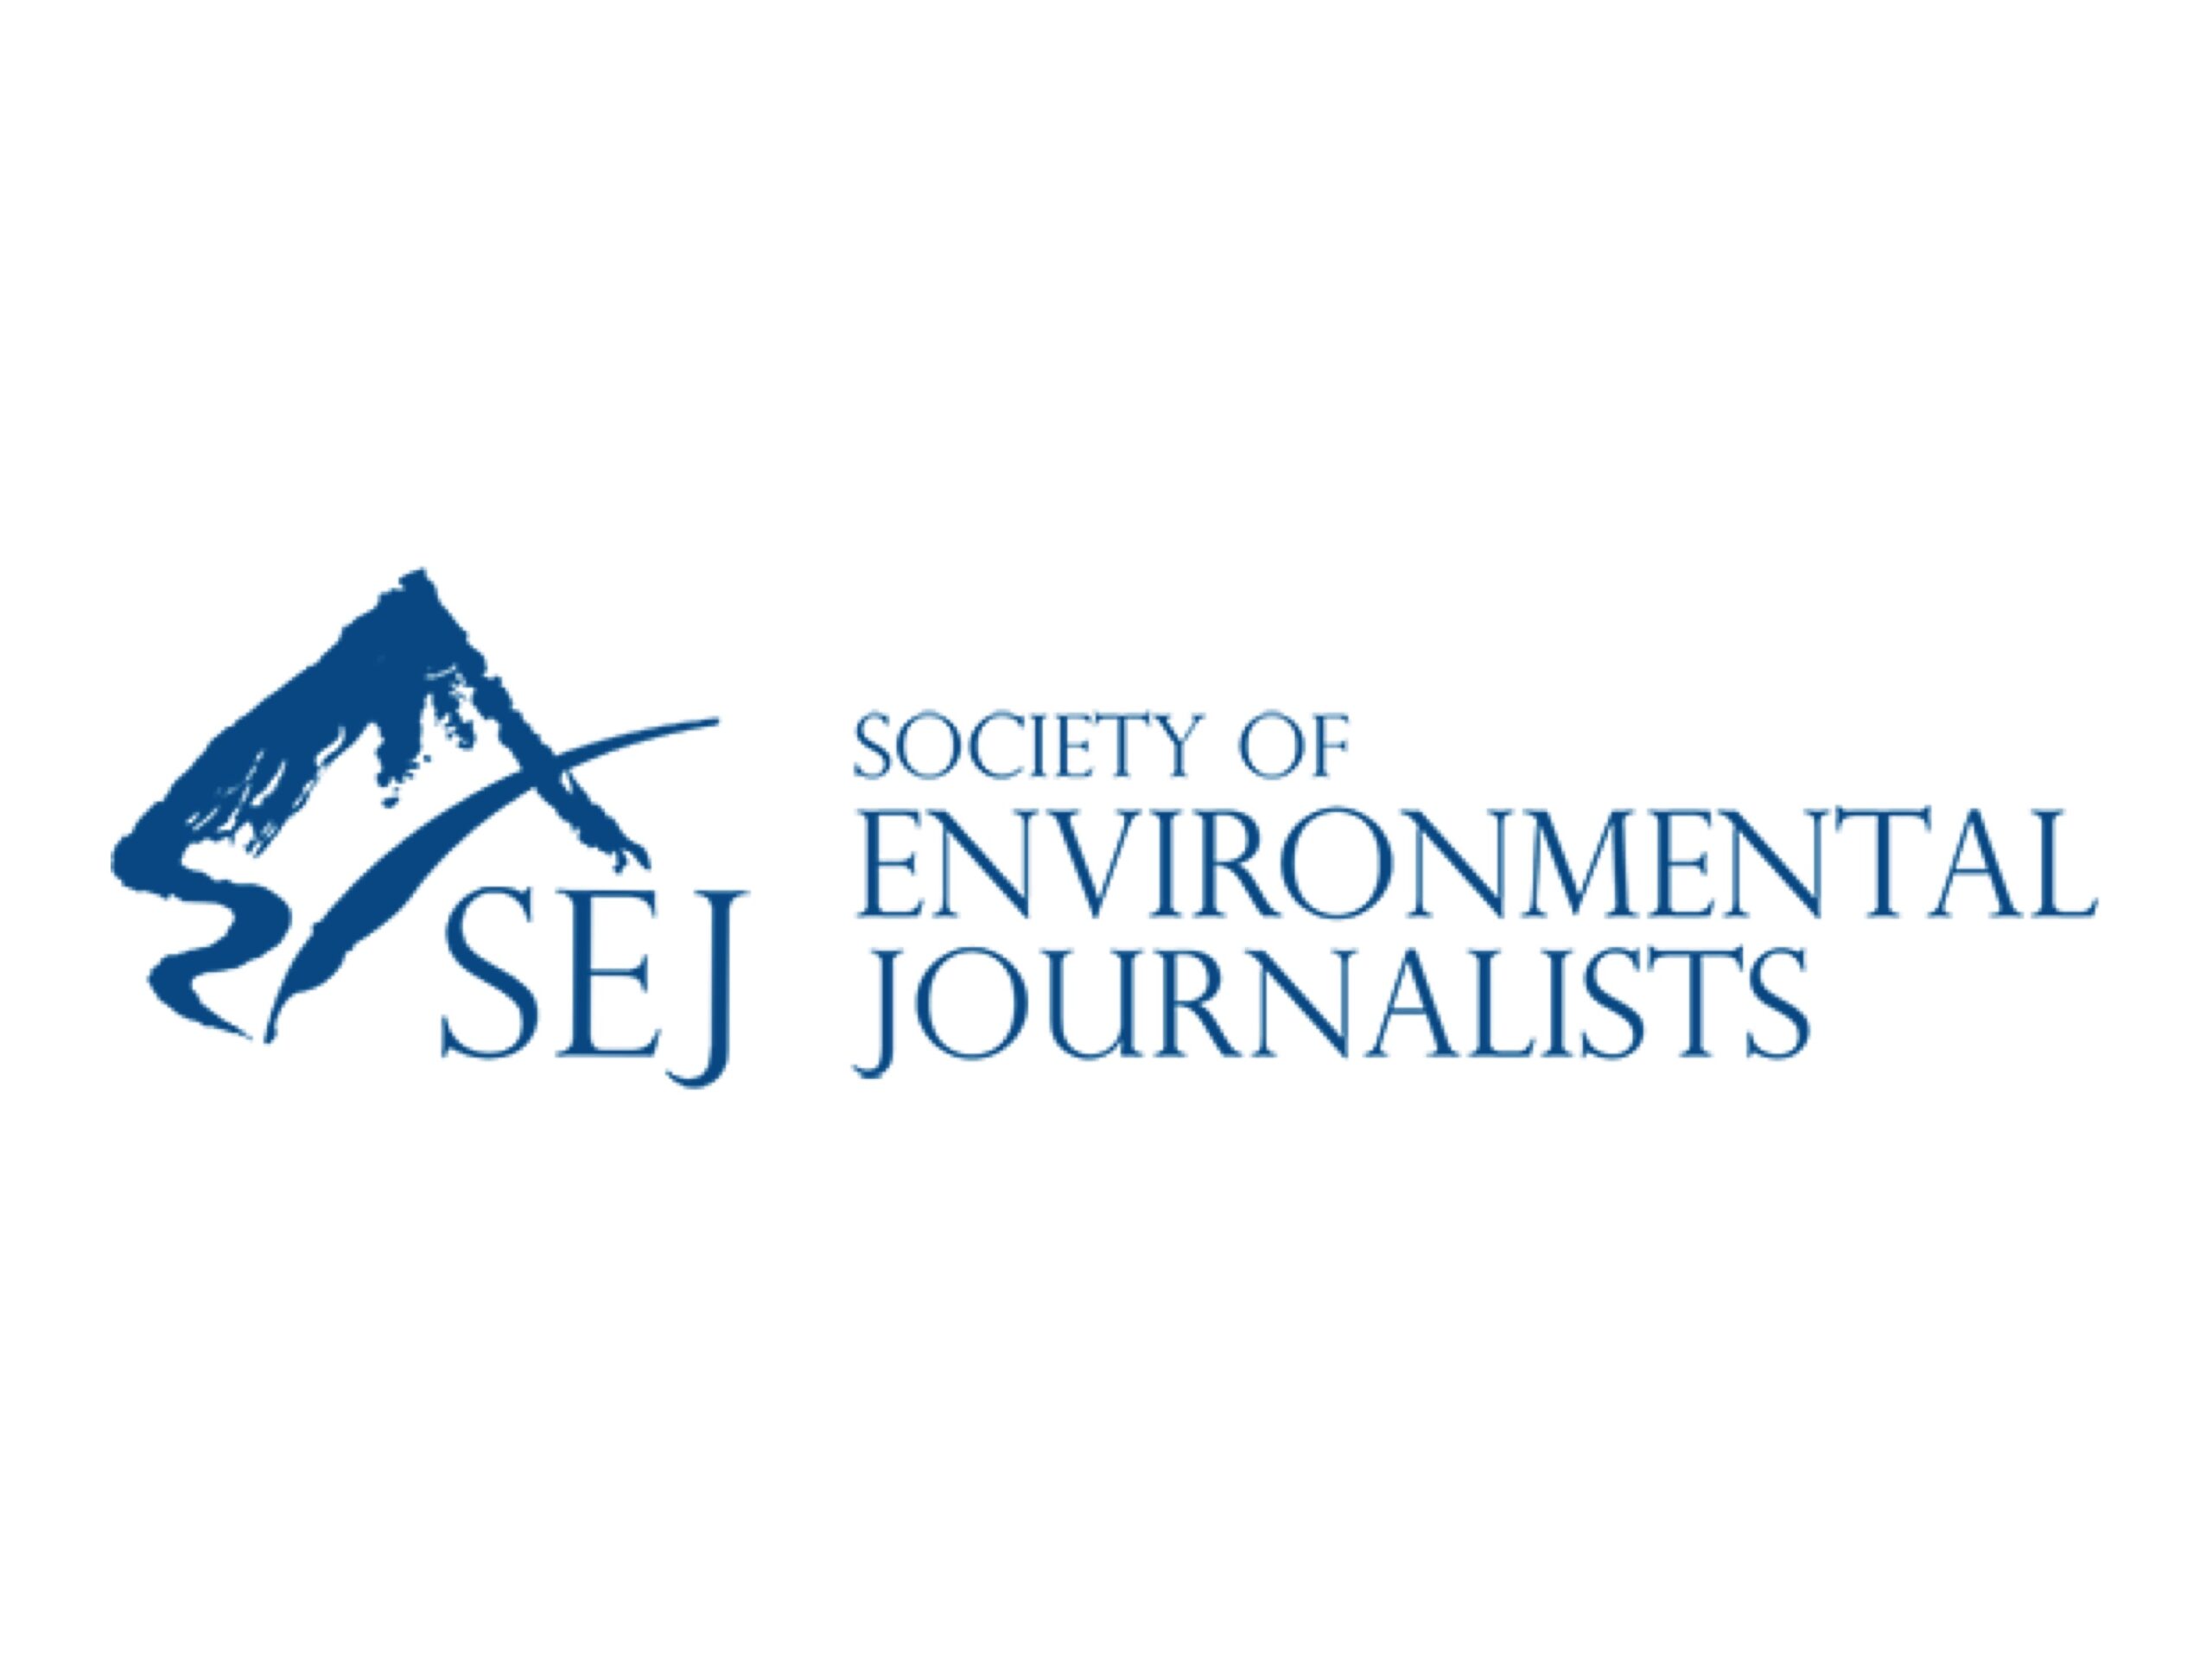 Become a Member of the Society of Environmental Journalists